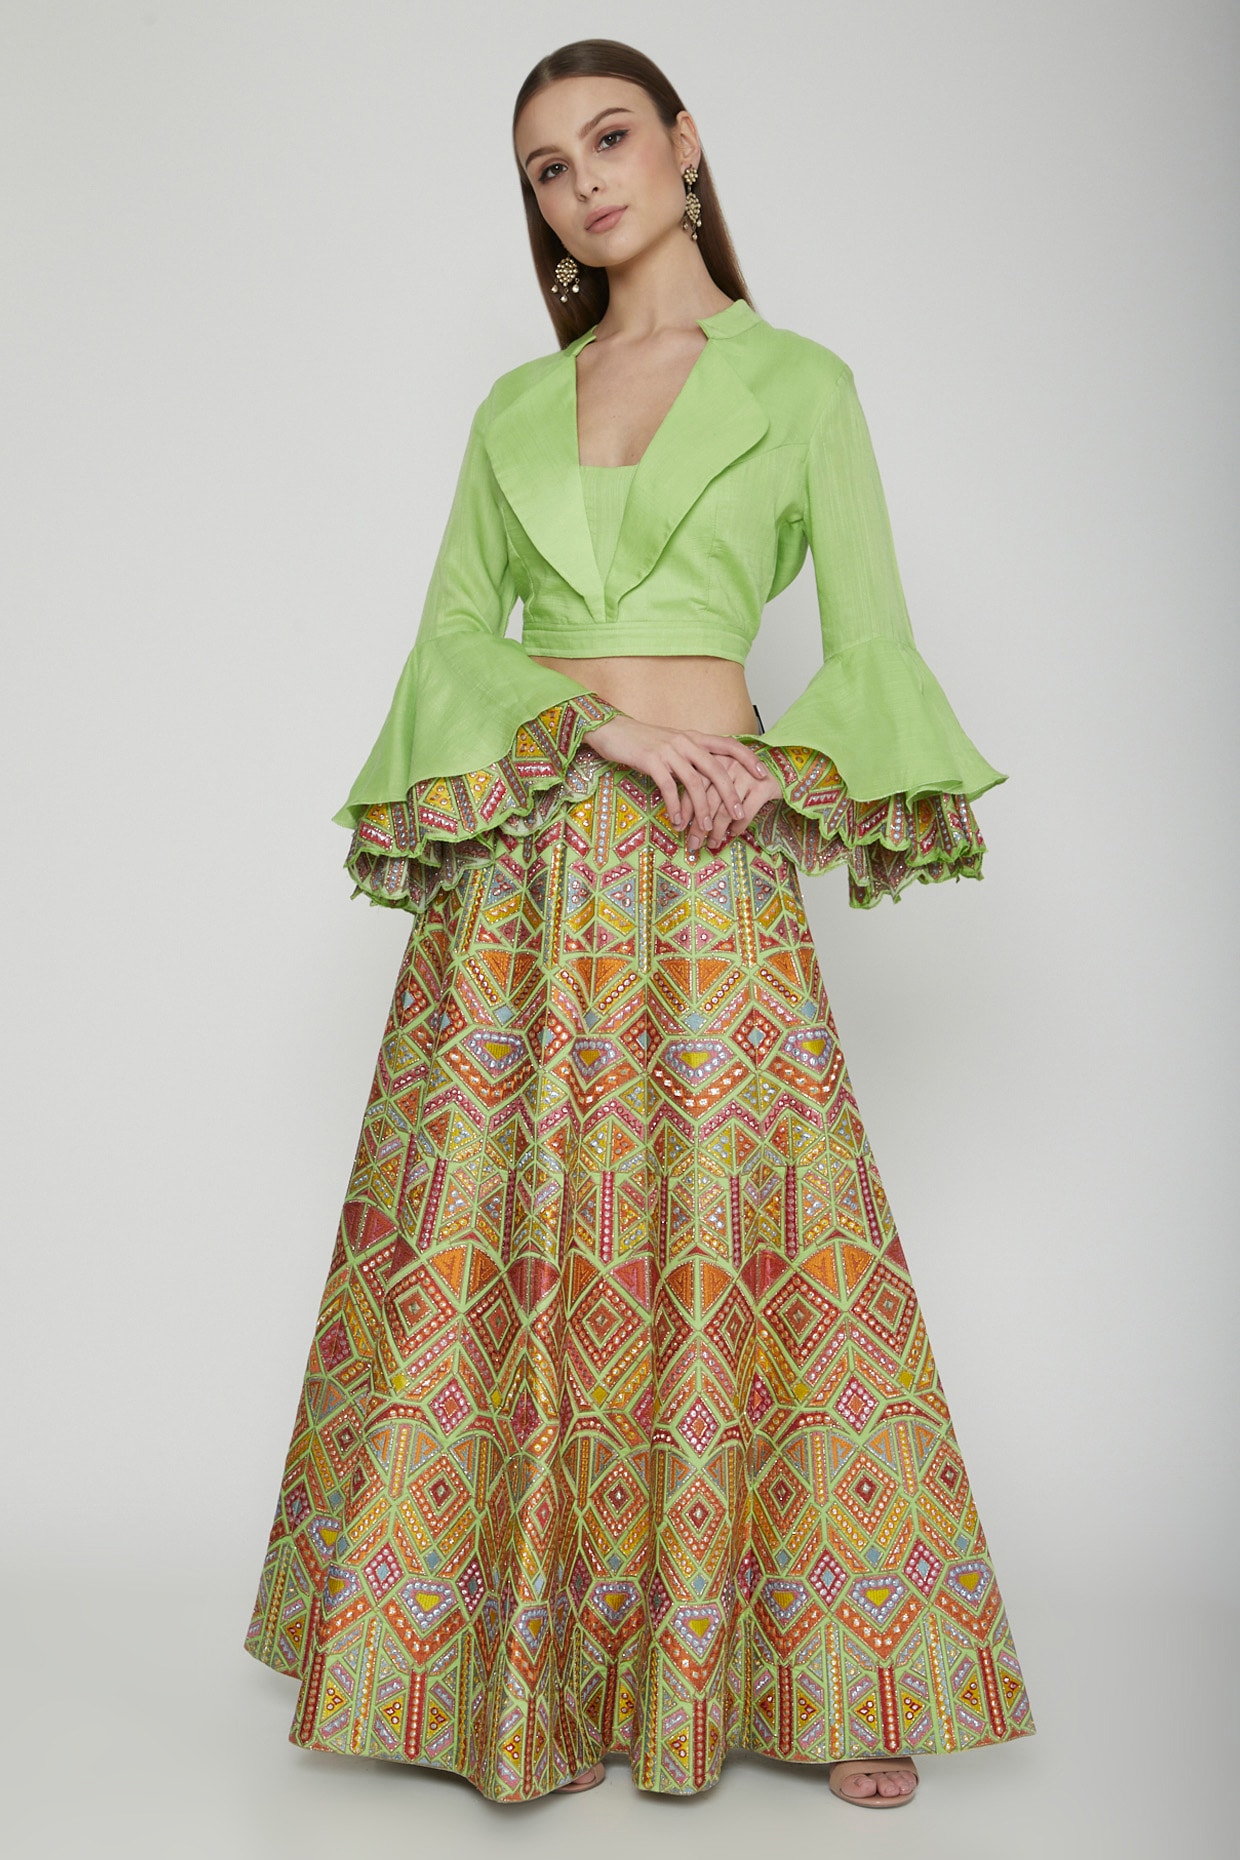 long skirt with top design